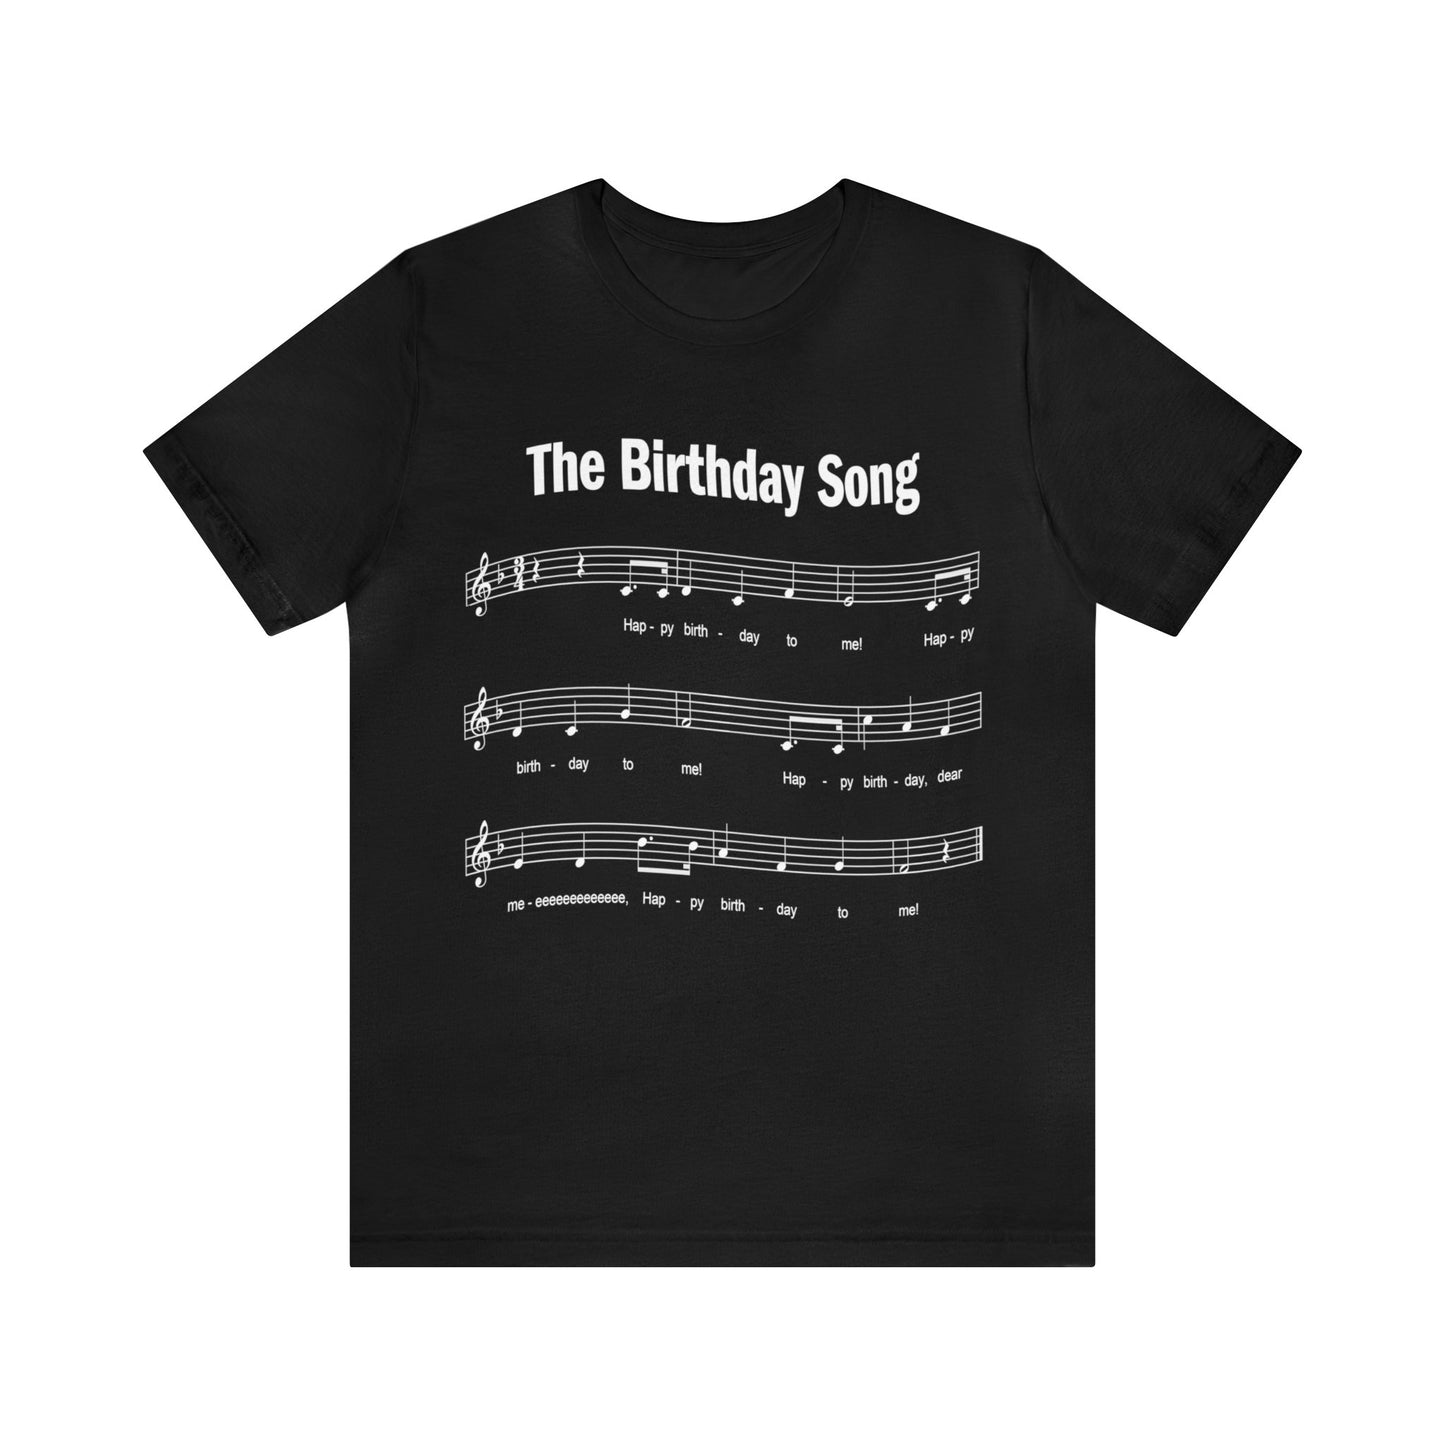 90th Birthday Gift T-shirt, Birthday Song NINE OH! 2-sided, Unisex Bella+Canvas 3001 T-shirt, Dark Colors, Funny Shirt for Surprise Parties